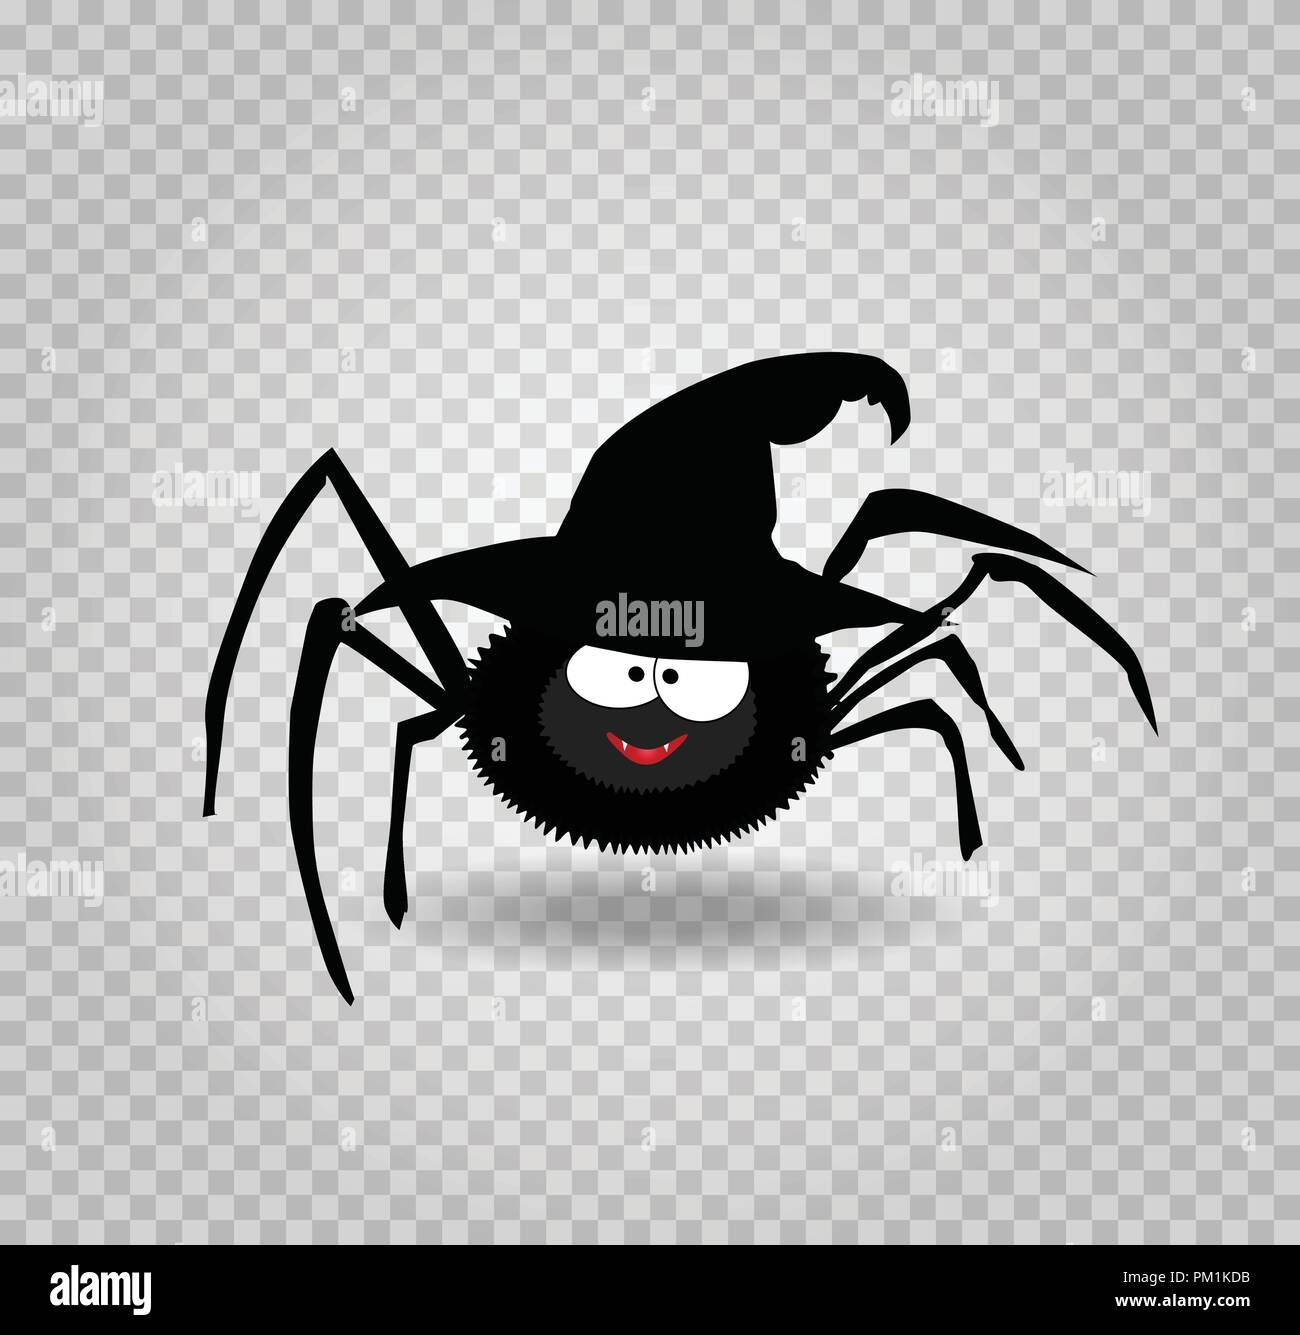 animated spider silhouette wallpaper